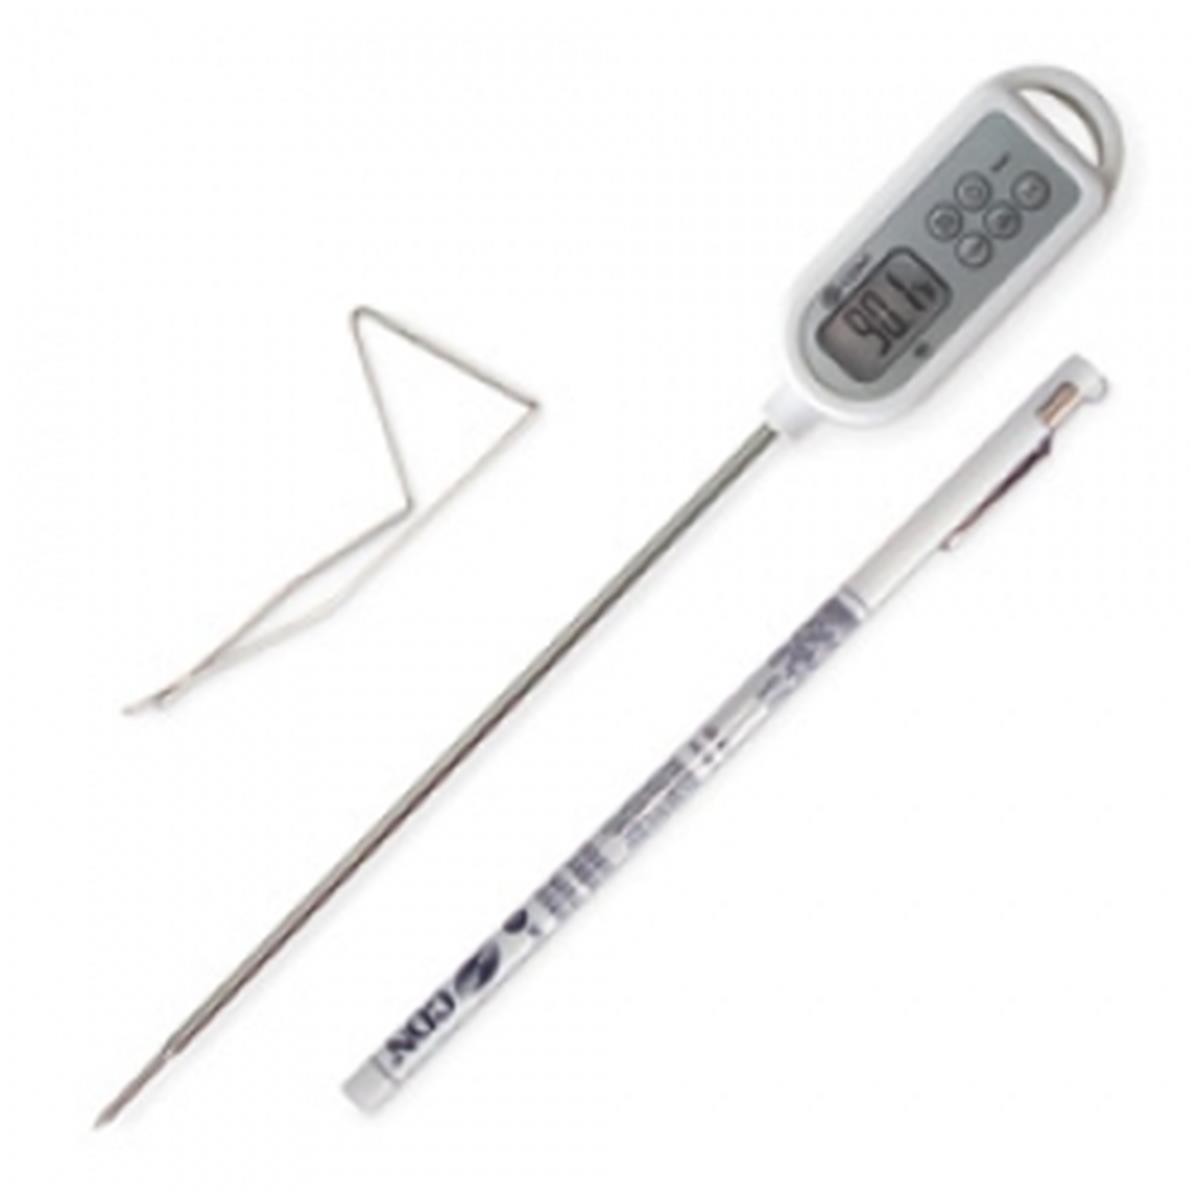 Dtw450l Proaccurate Waterproof Thermometer - Long Stem